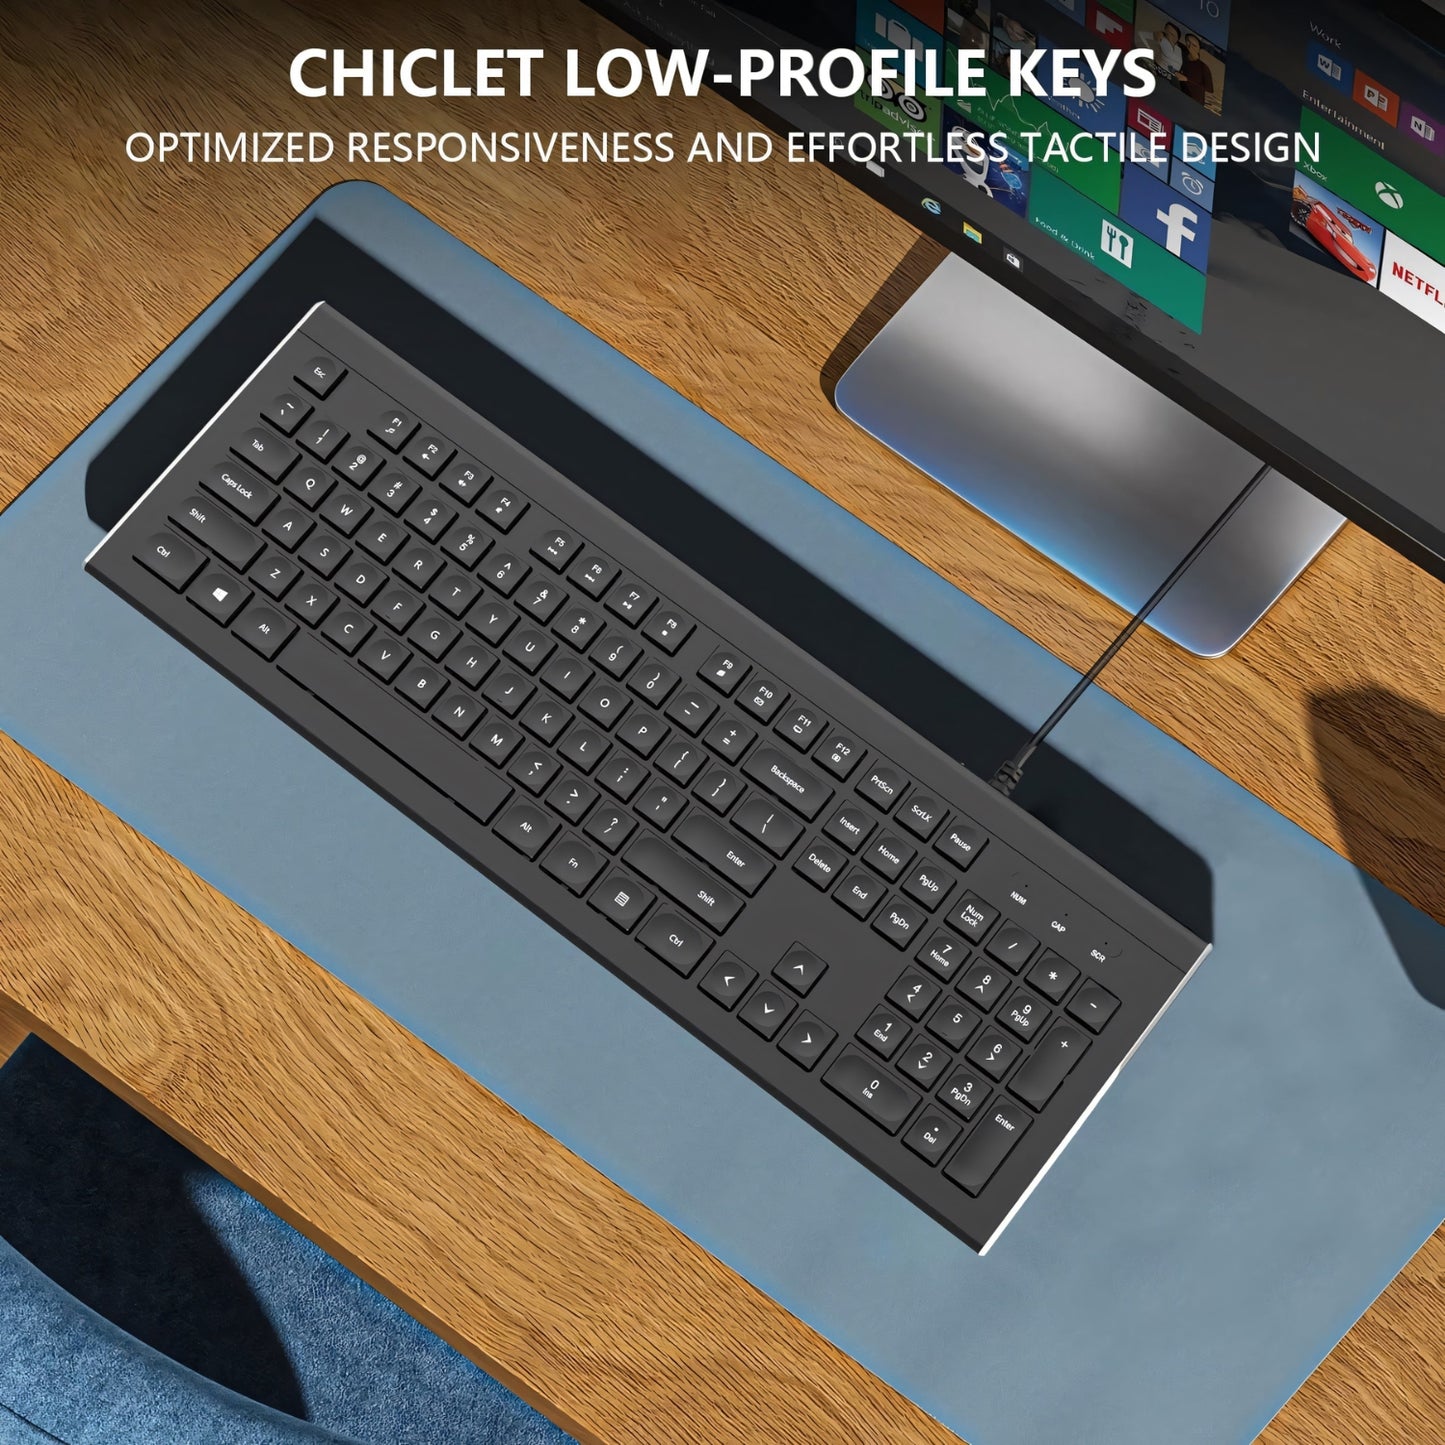 A modern and sleek workspace featuring an Clevisco ergonomic keyboard with chiclet low-profile keys, optimized for responsiveness and effortless tactile design. The keyboard is placed on a stylish blue desk mat. In the background, a monitor displaying various app icons is visible on the polished wooden desk. A person’s knee is partially visible at the bottom of the image, indicating that they are sitting at the desk